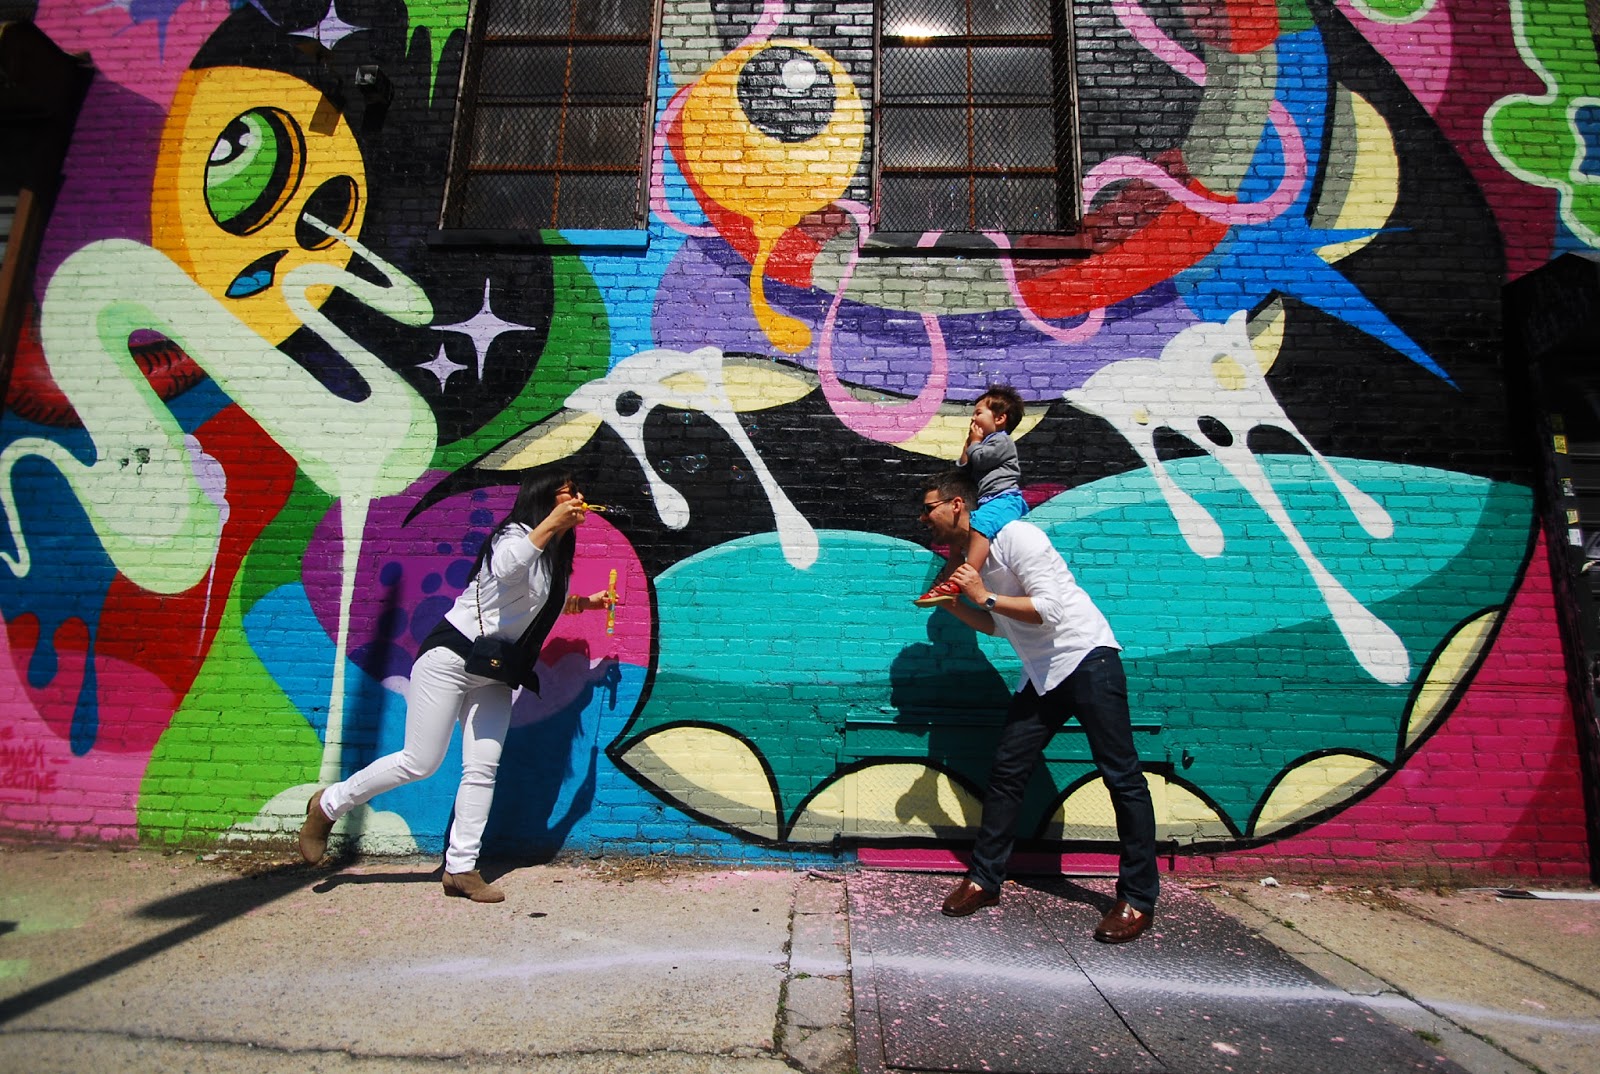 New York City Family: Eye Candy In NYC: Outdoor Graffiti Gallery in ...